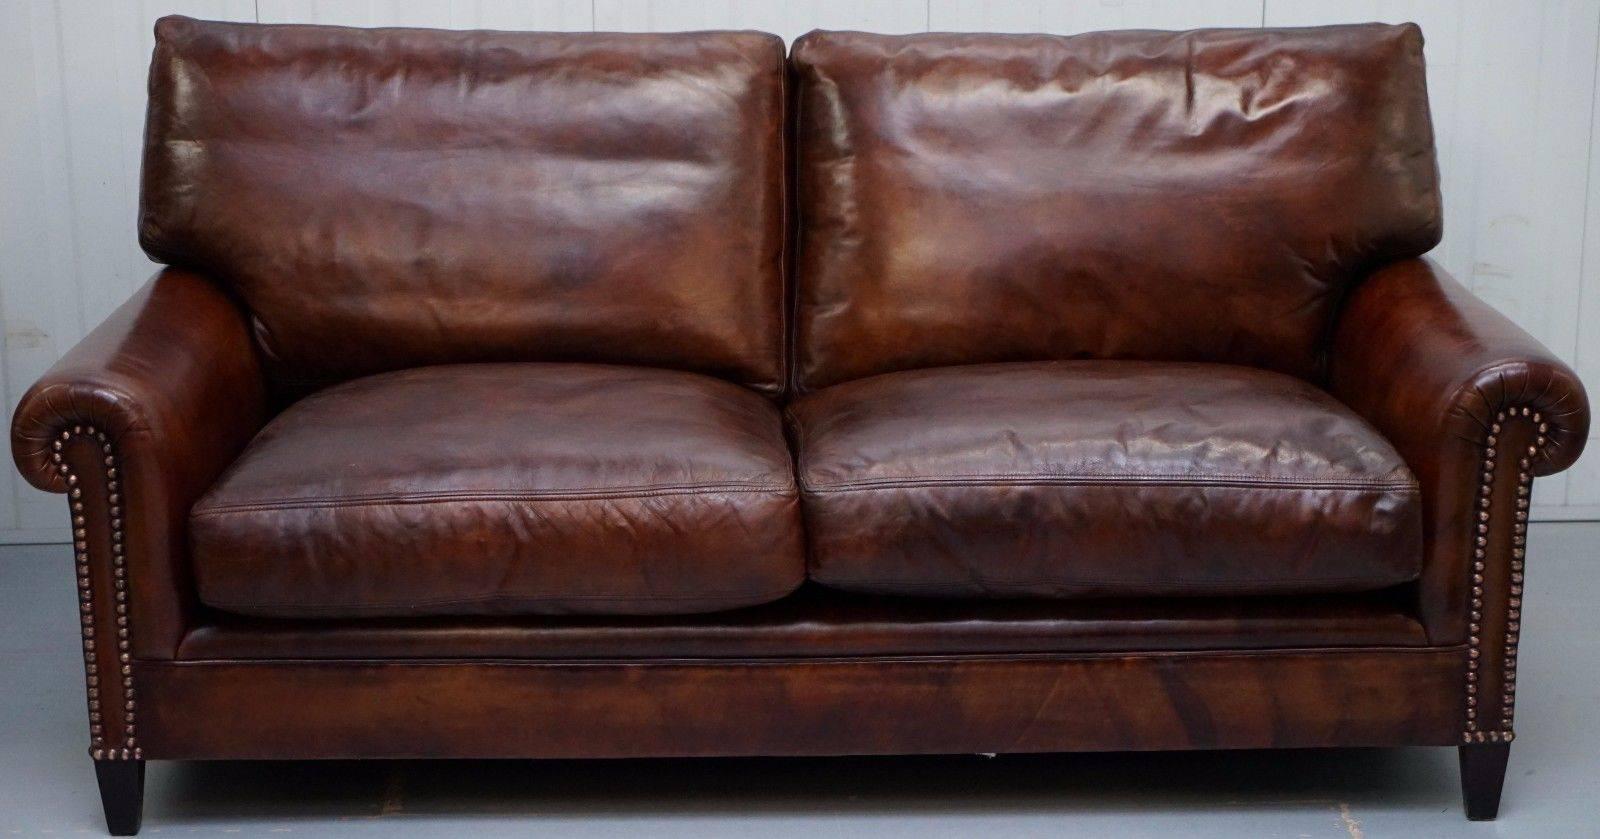 Edwardian Fully Restored George Smith Aged Whiskey Brown Leather Signature Sofa Feathers